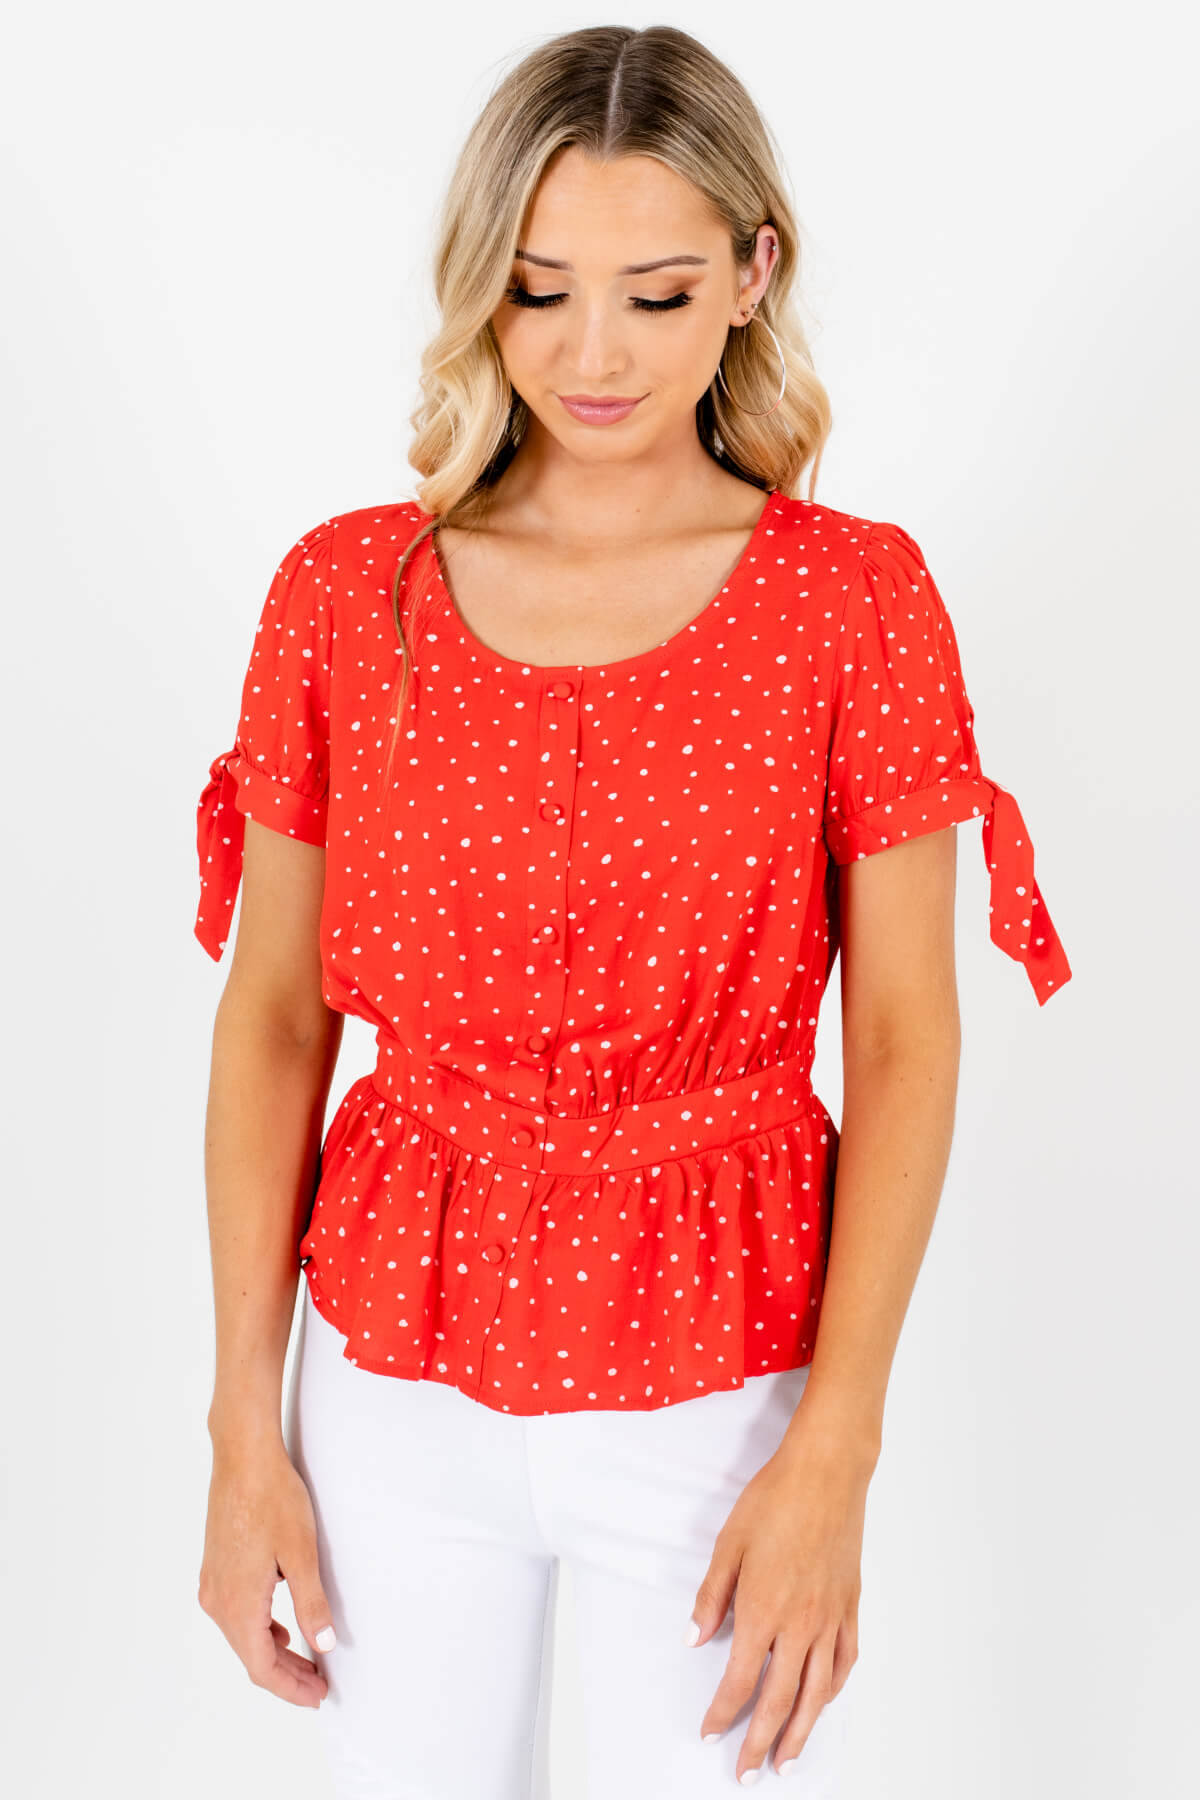 Red and White Polka Dot Patterned Boutique Tops for Women